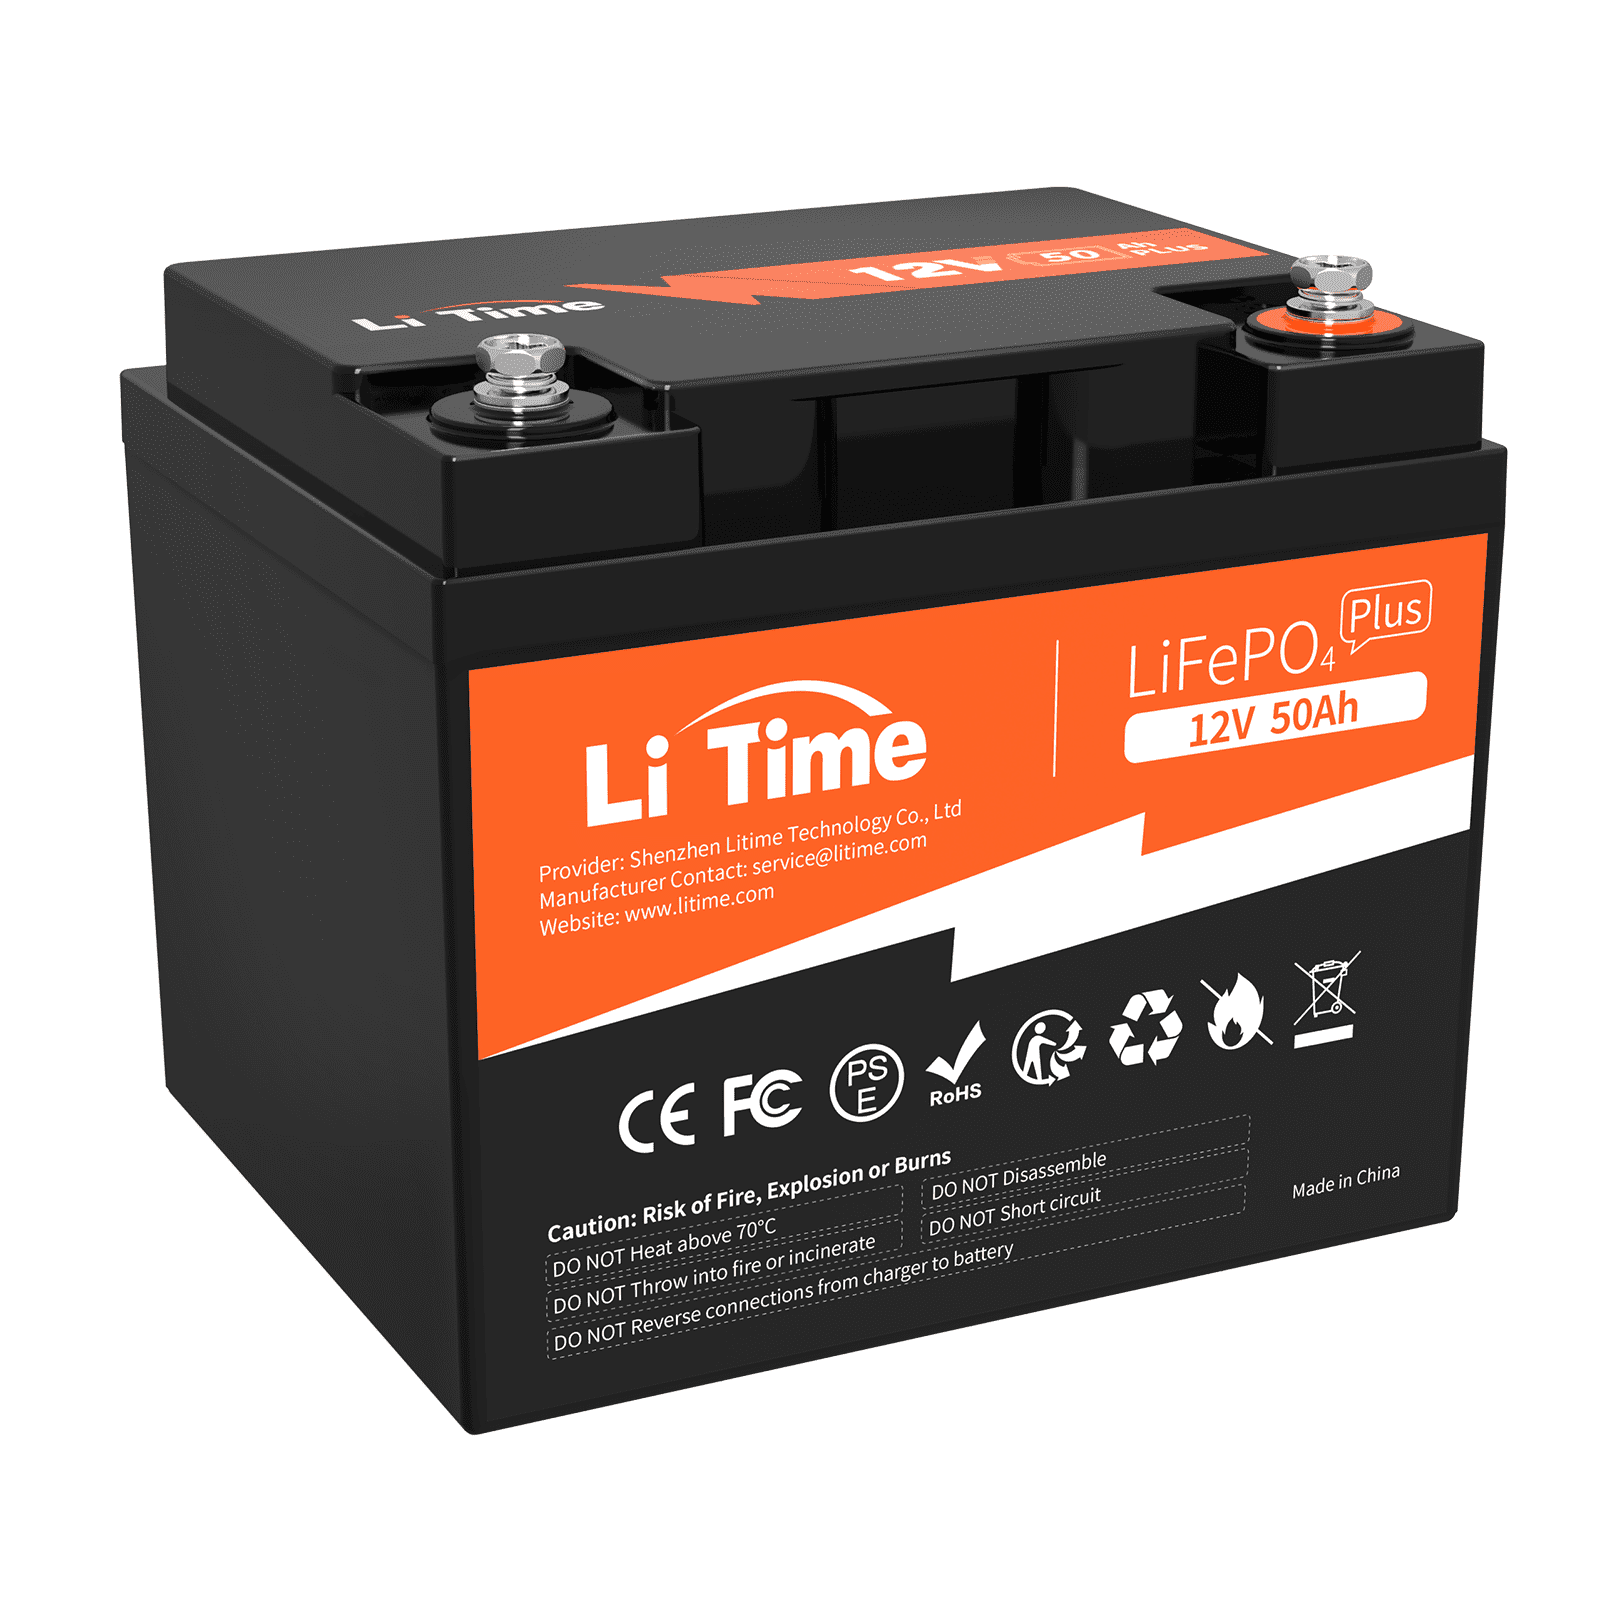 LiTime 12V 50Ah LiFePO4 Lithium Ion Battery, 4000+ Cycles, Lighter LiFePO4  Battery for Camping Trolling Motor Boat 